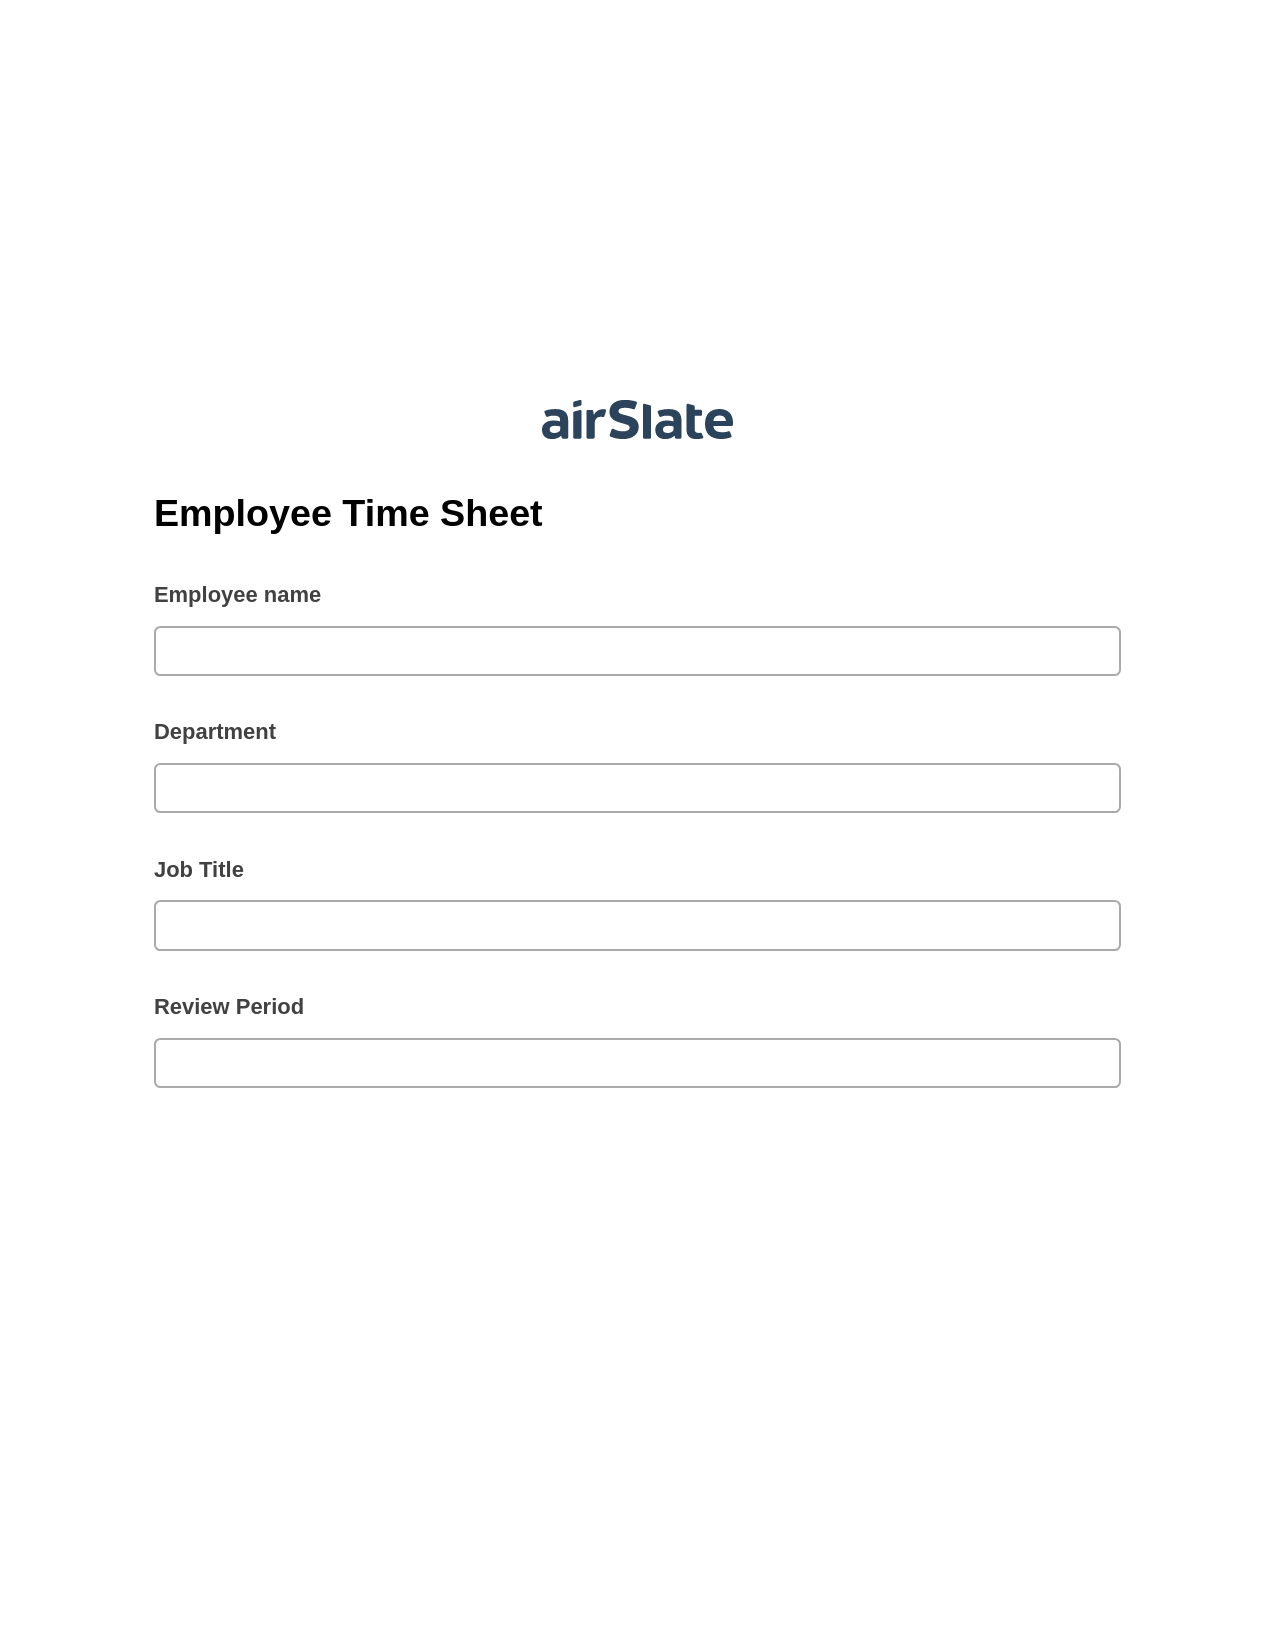 Employee Time Sheet Pre-fill from CSV File Bot, Create Salesforce Records Bot, Email Notification Postfinish Bot